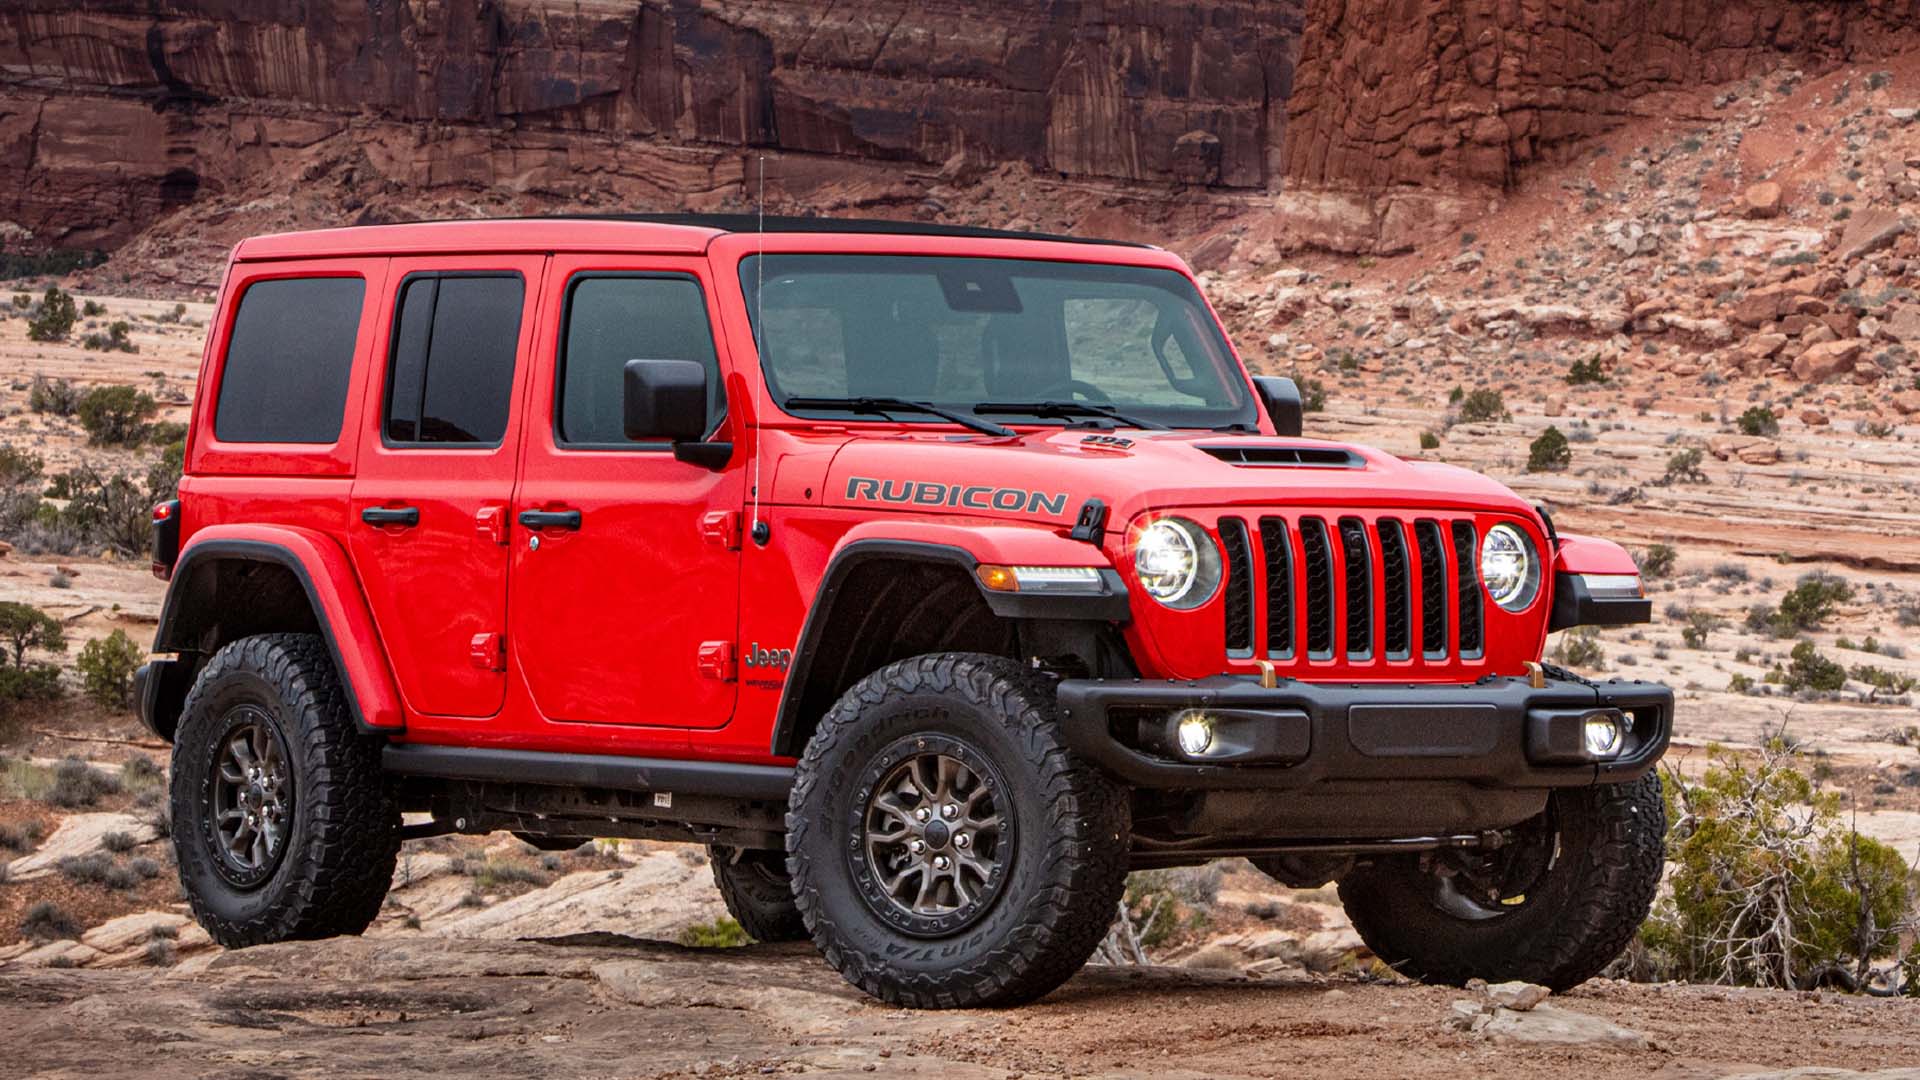 Jeep Wrangler Still Outsells Ford Bronco Almost 2 to 1 | The Drive